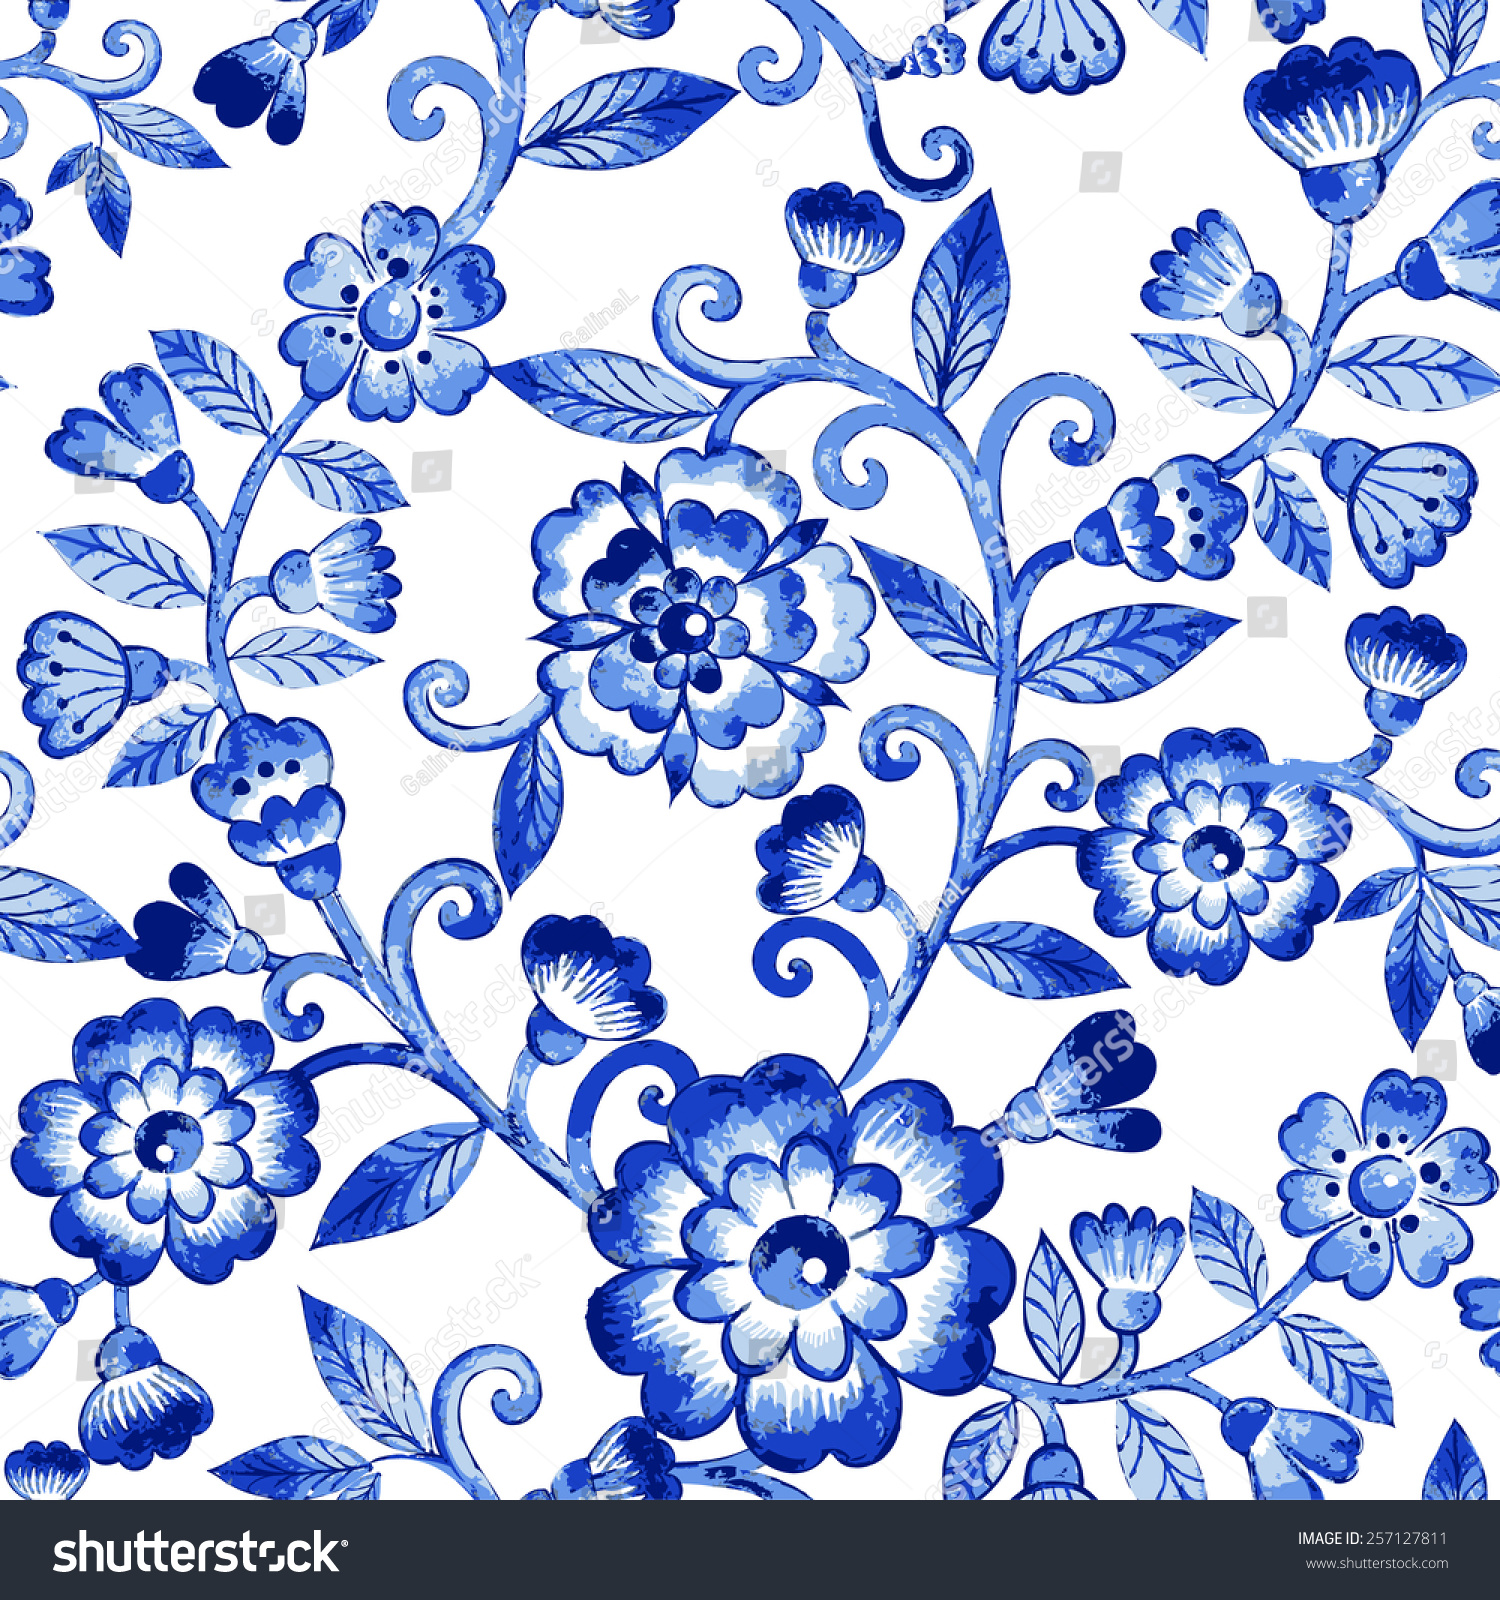 Vector Floral Watercolor Texture Pattern Blue Stock Vector (Royalty ...